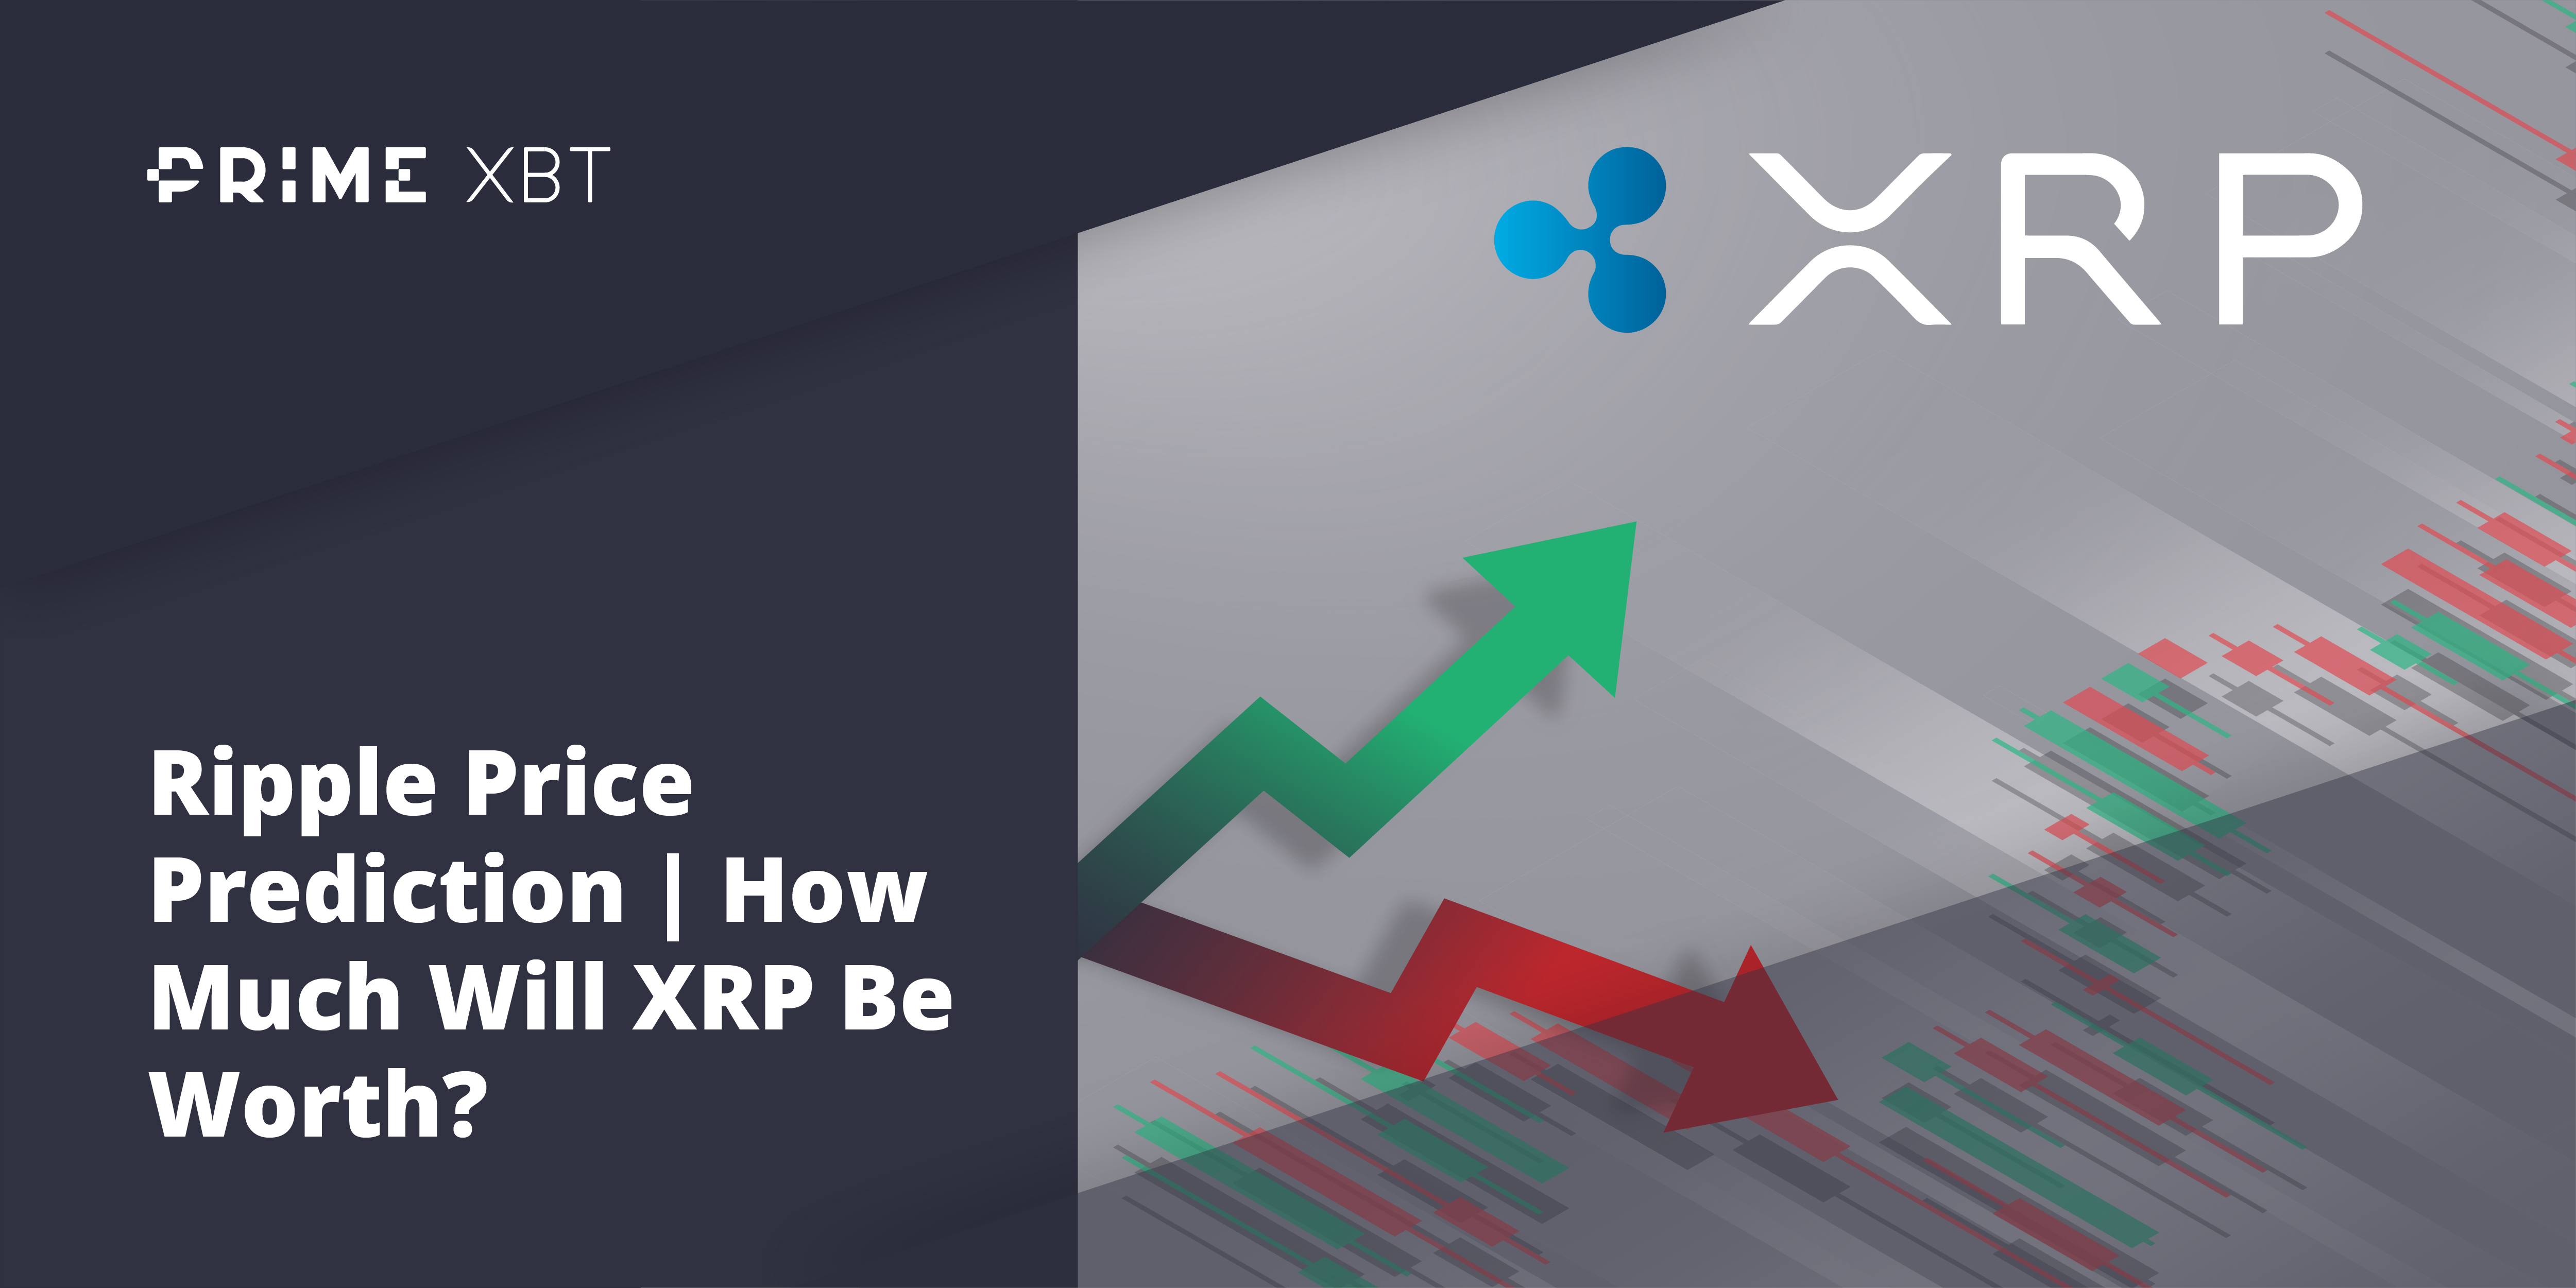 Ripple Price Prediction: How Much Will XRP Be Worth Following the Settlement? - xrp 1